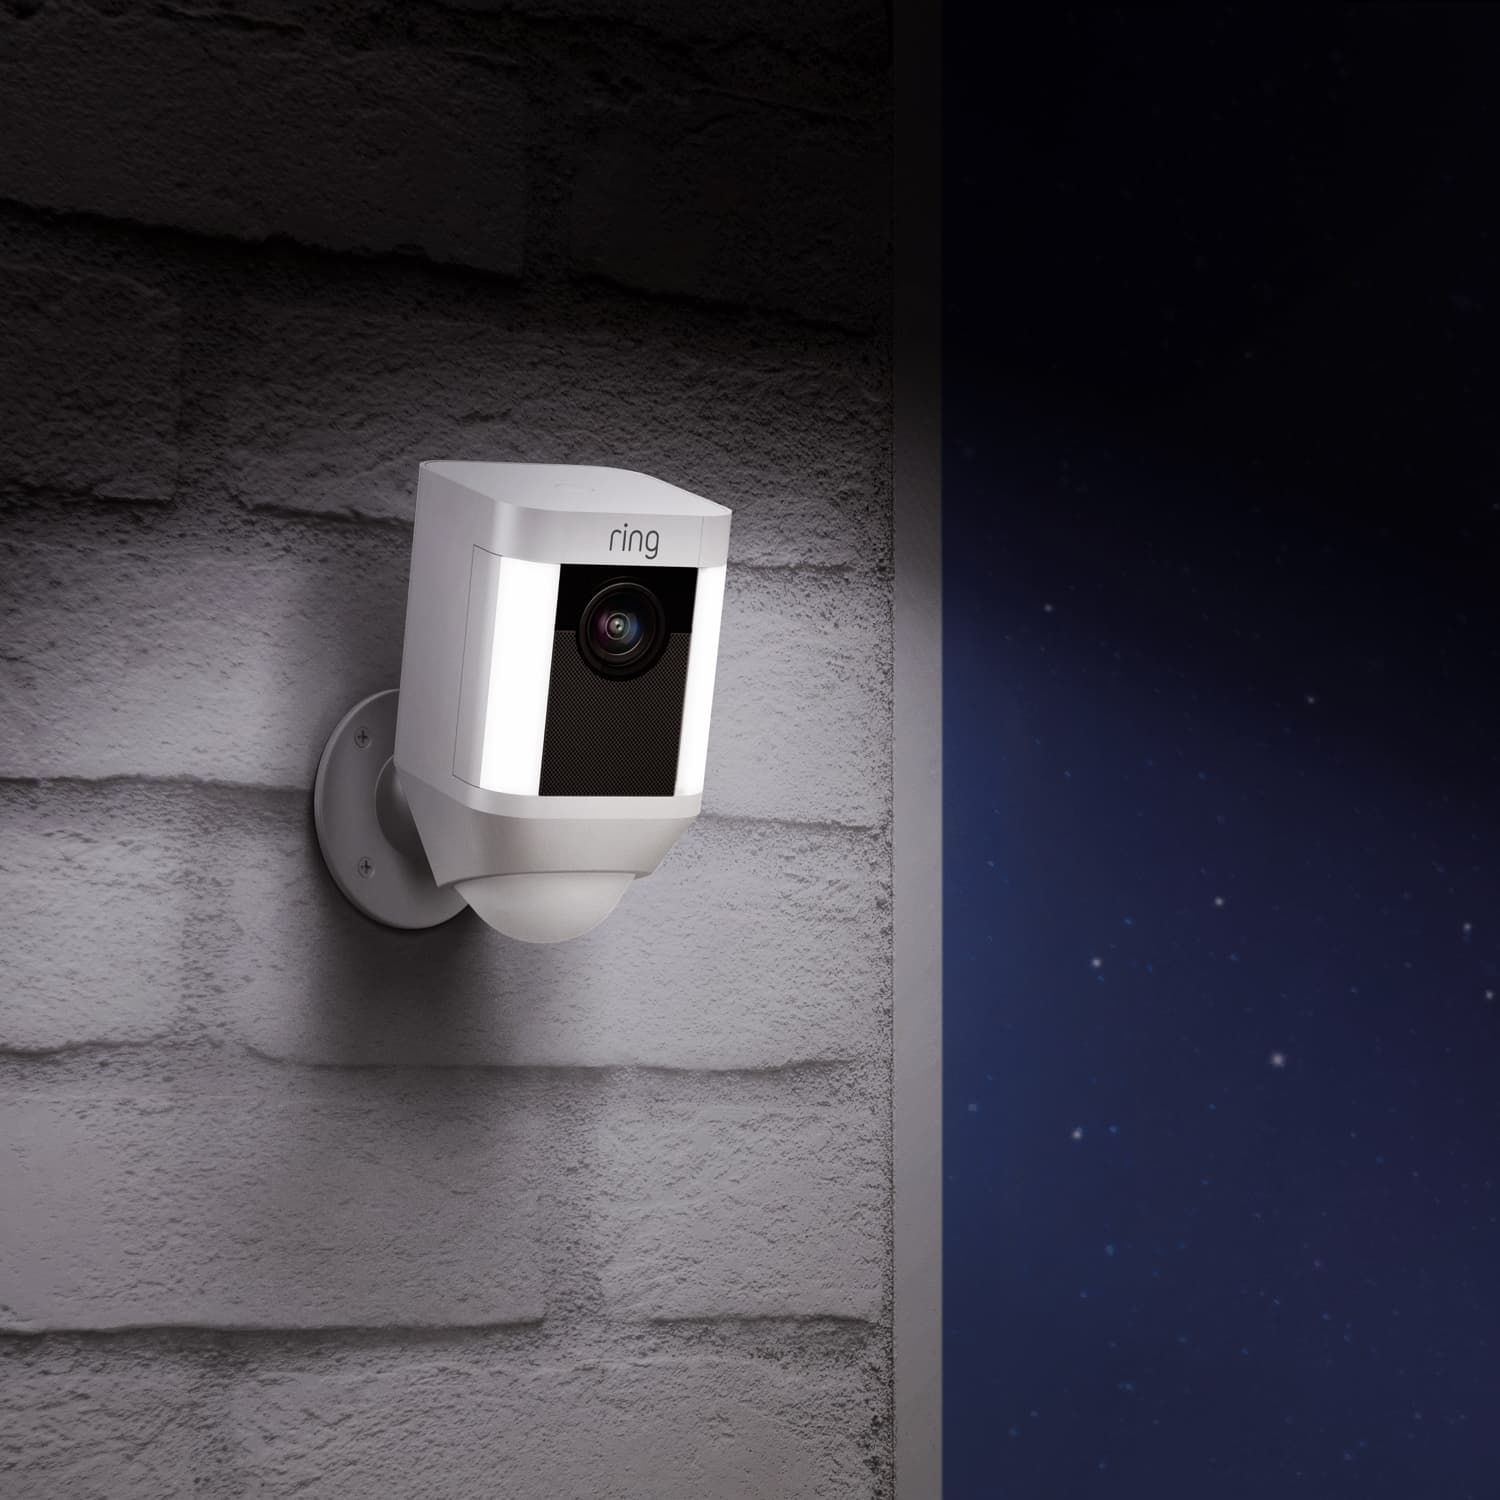 Spotlight Cam Battery (for Certified Refurbished) - Outdoors at night, Spotlight Cam Battery with lights illuminated is mounted to a brick wall.